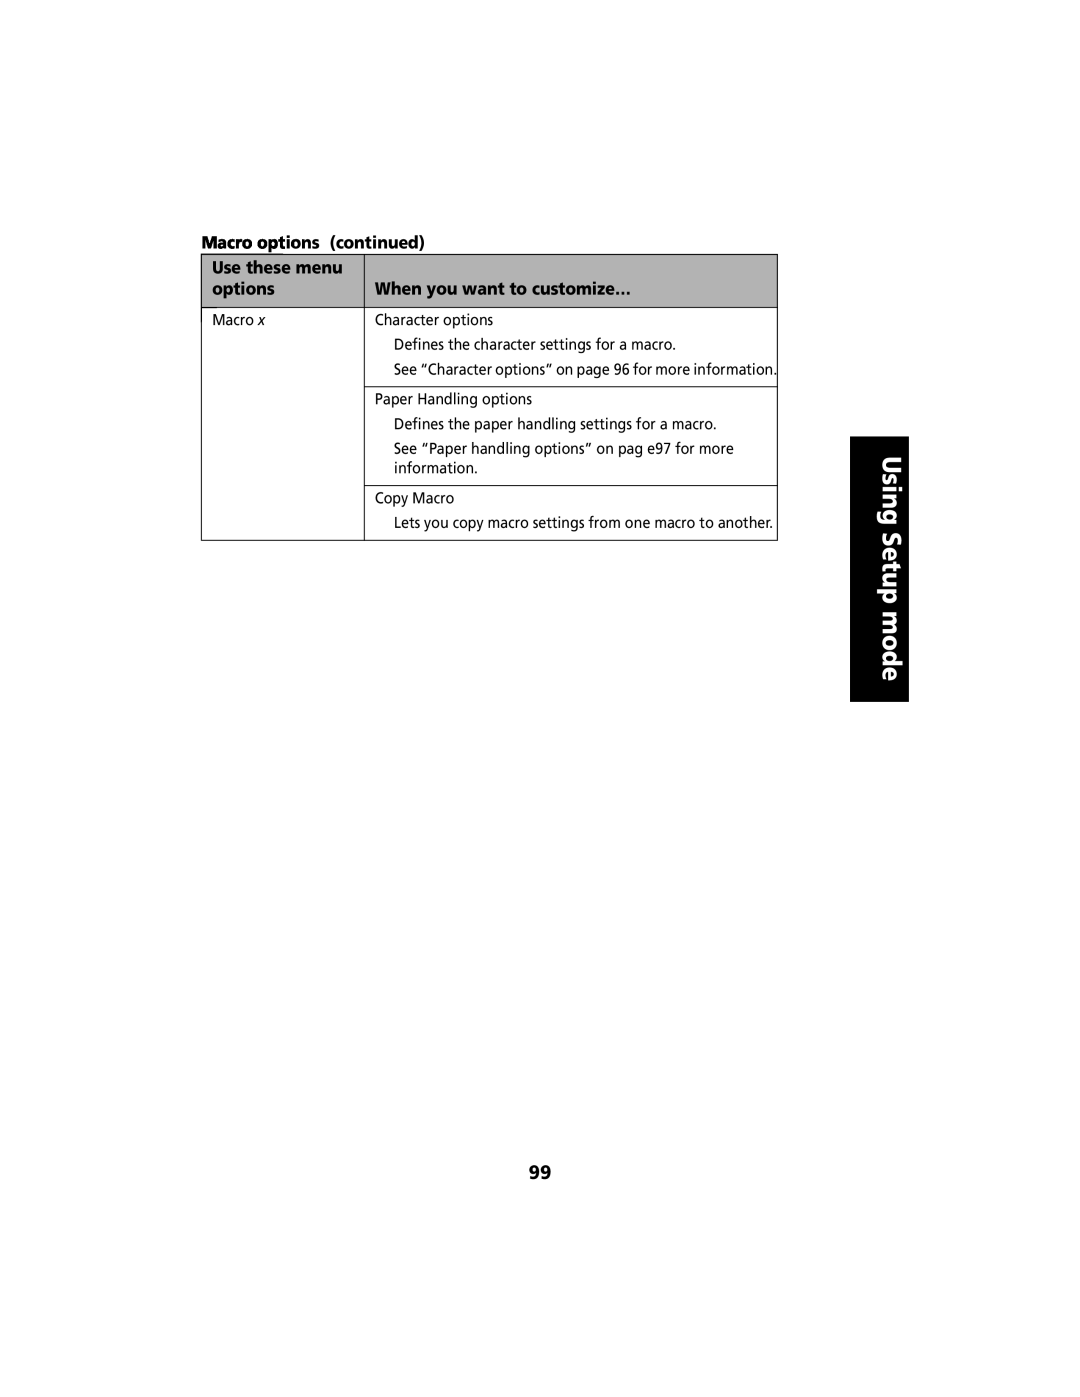 Lexmark 2480 manual Using Setup mode, See “Character options” on page 96 for more information 